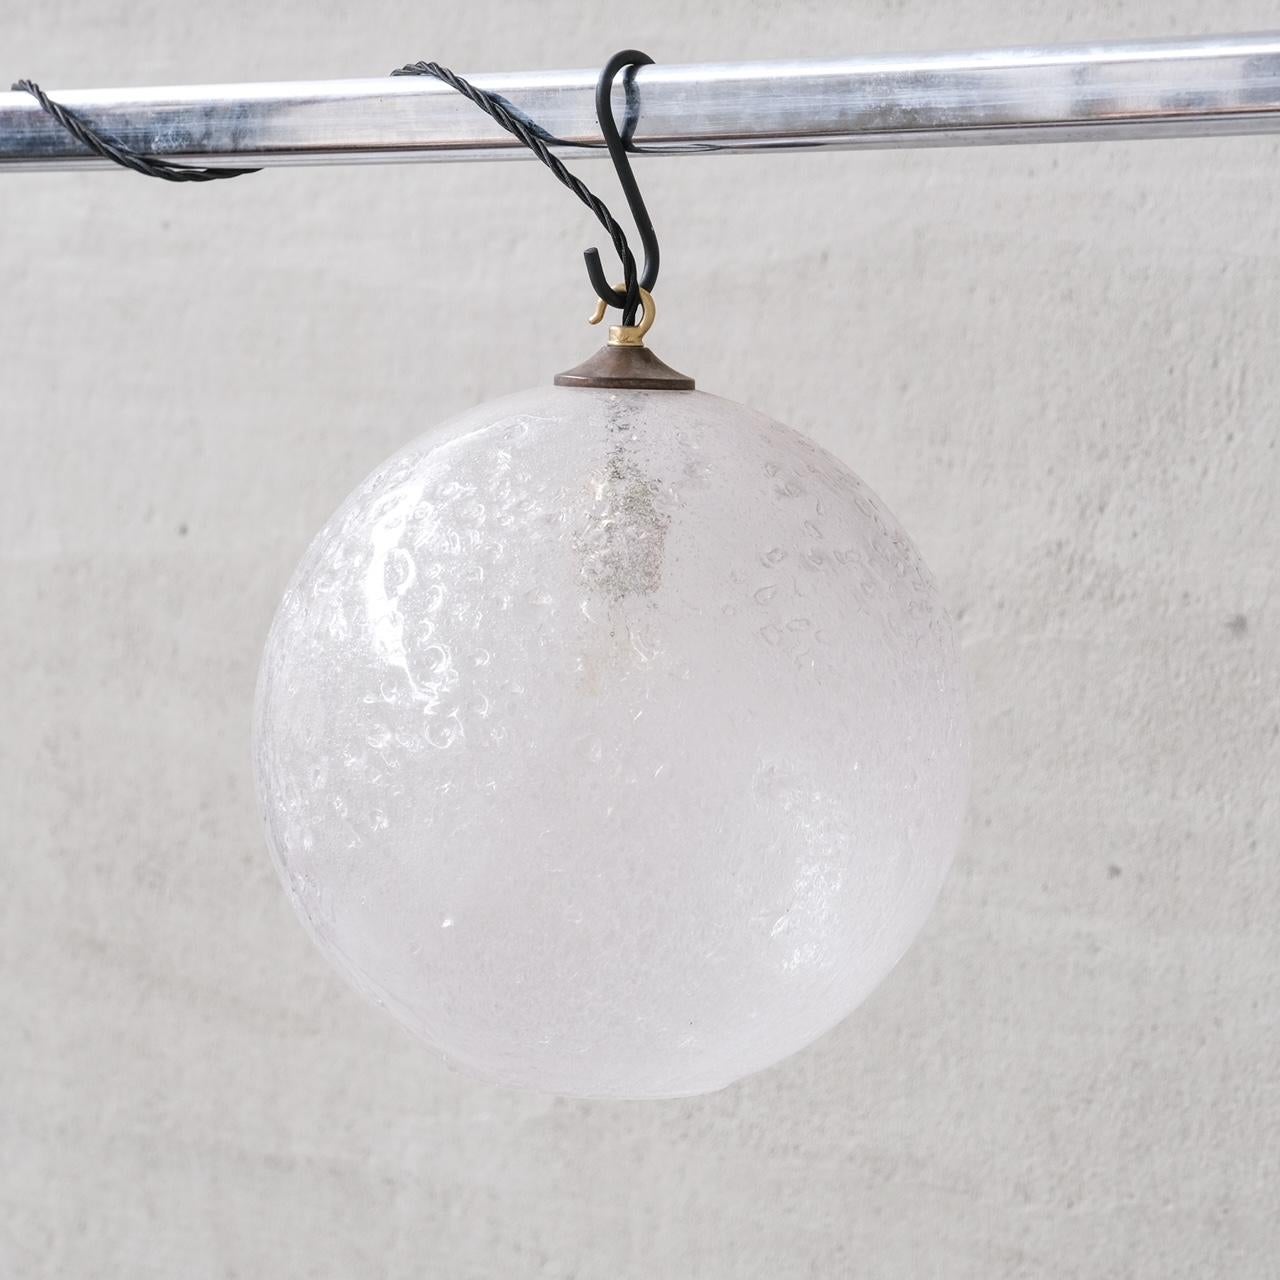 Unusual large murano glass pendant lights.

Italy, c1960s.

Unusual glass, semi-opaque, crater like finish reminiscent of a moon.

PRICED AND SOLD INDIVIDUALLY.

9 available at the time of listing.

No chain or rose was retained, however they are